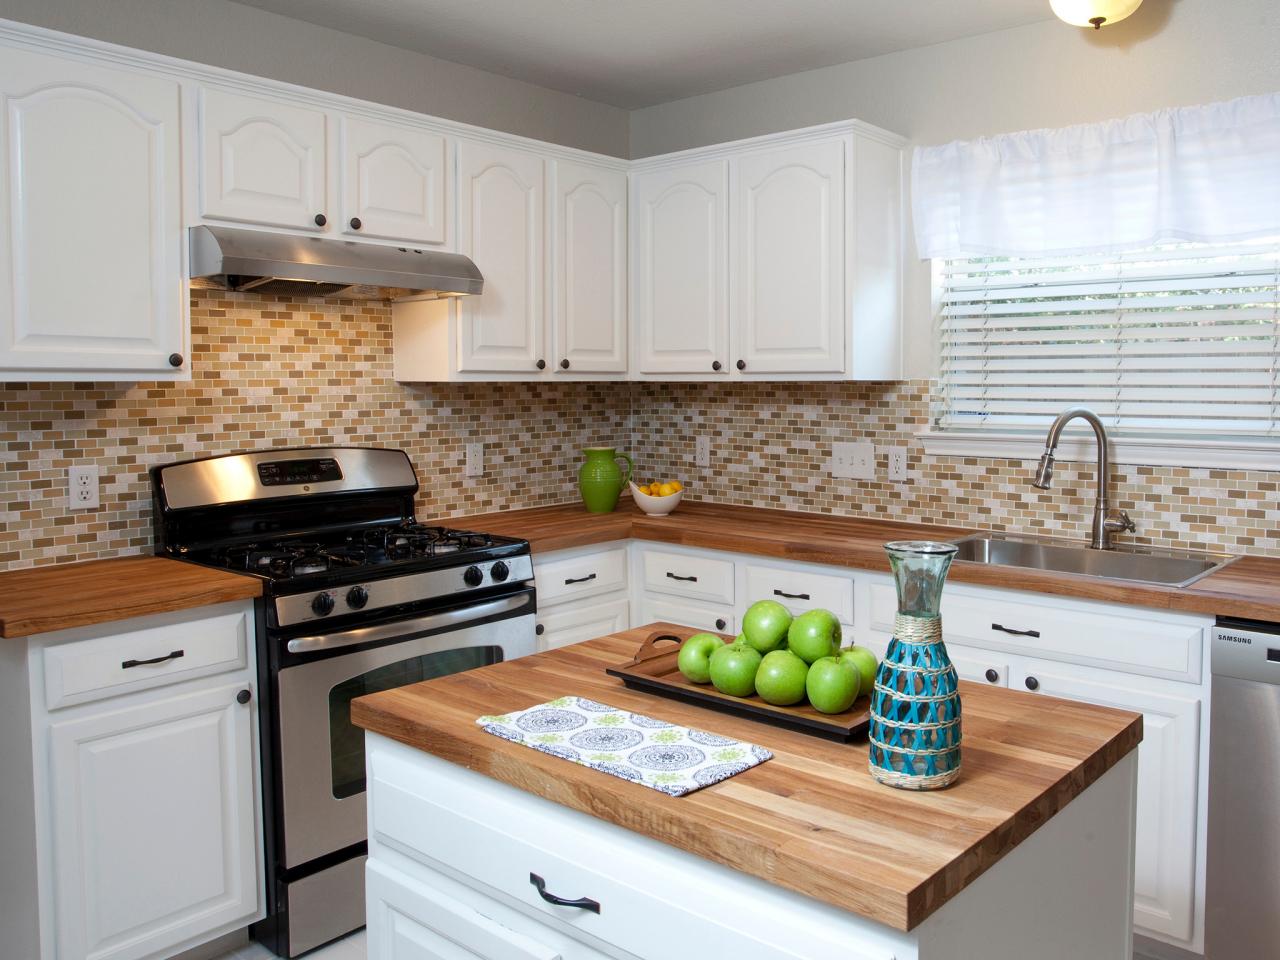 Painting Kitchen Countertops Pictures Options Ideas HGTV